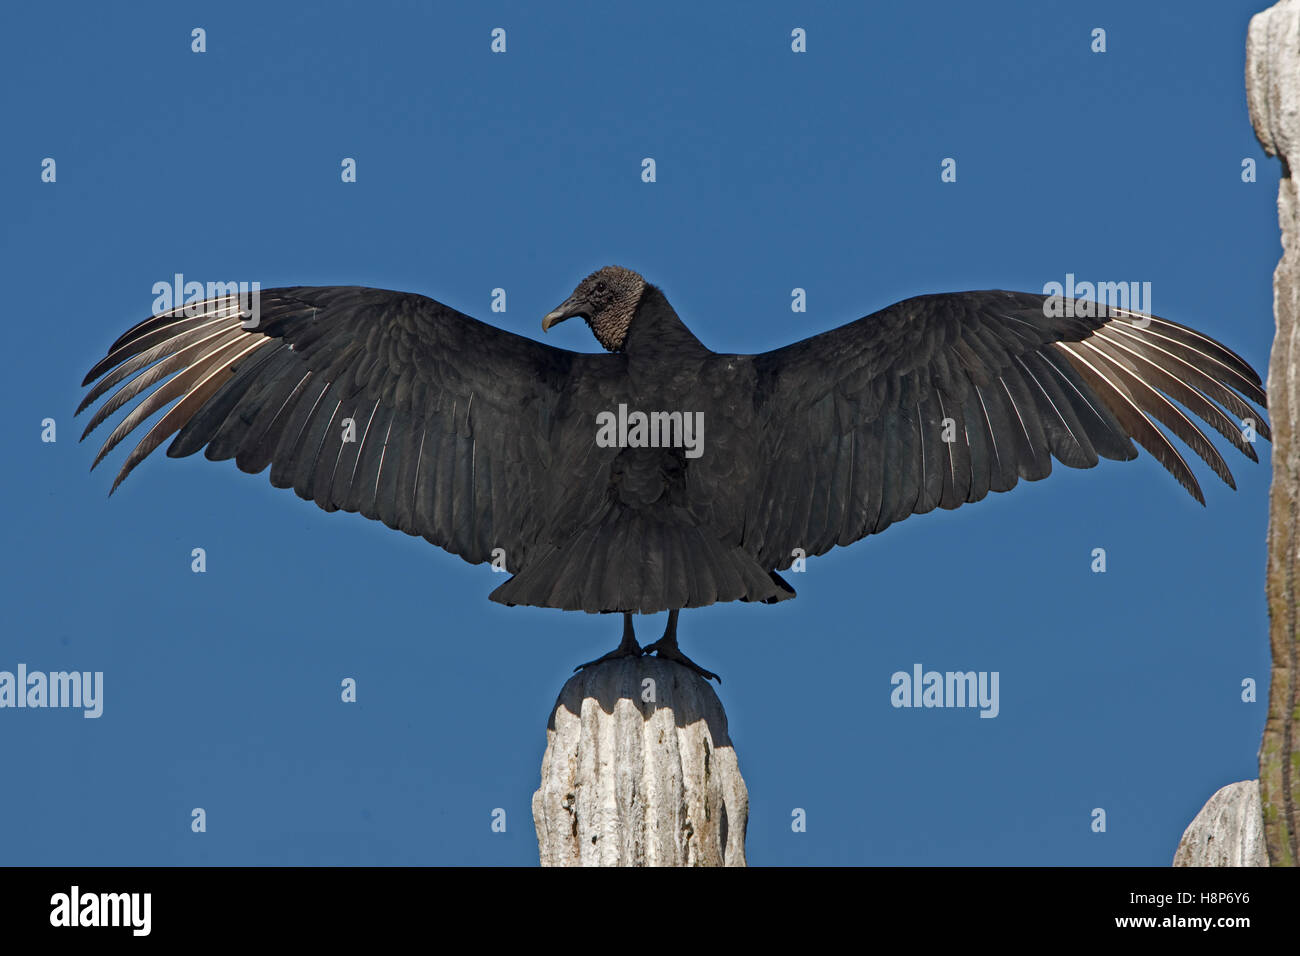 Black vulture, on cardon cactus, Sonora , Mexico, drying wings Stock Photo